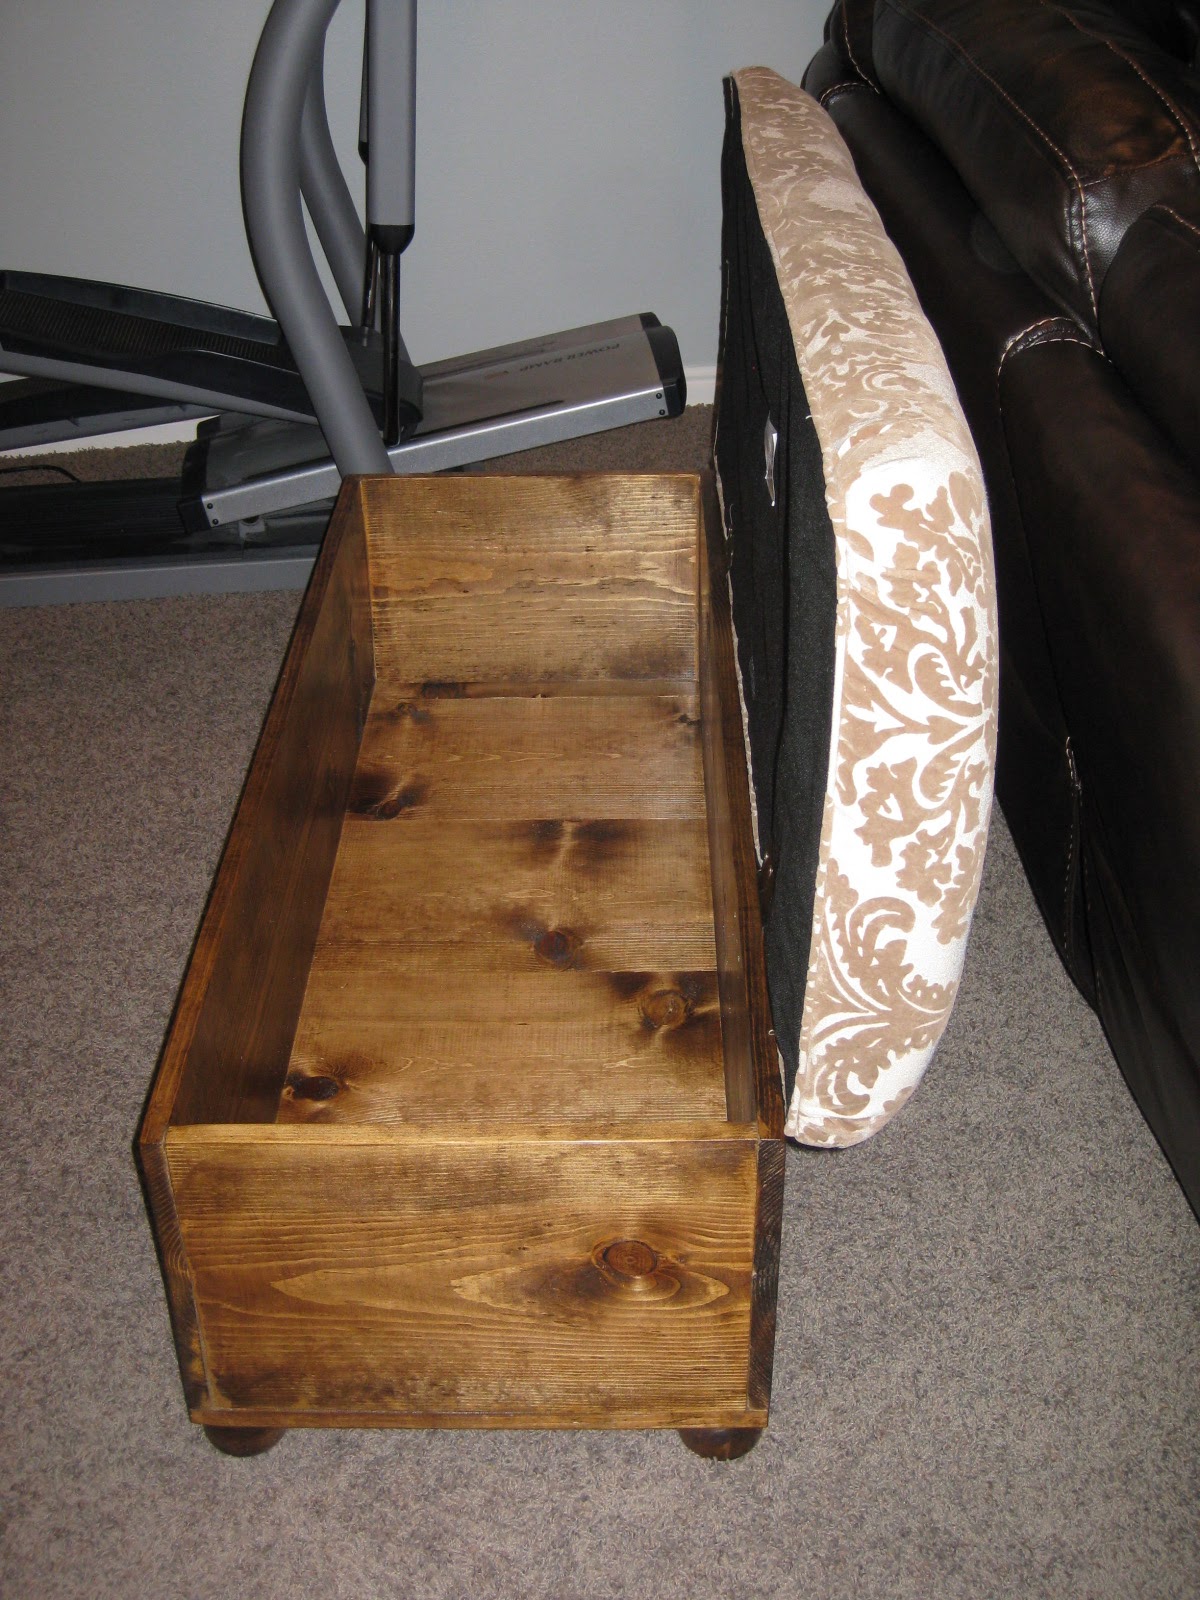 TDA decorating and design: Storage Ottoman - Finishing Touches - Part 2